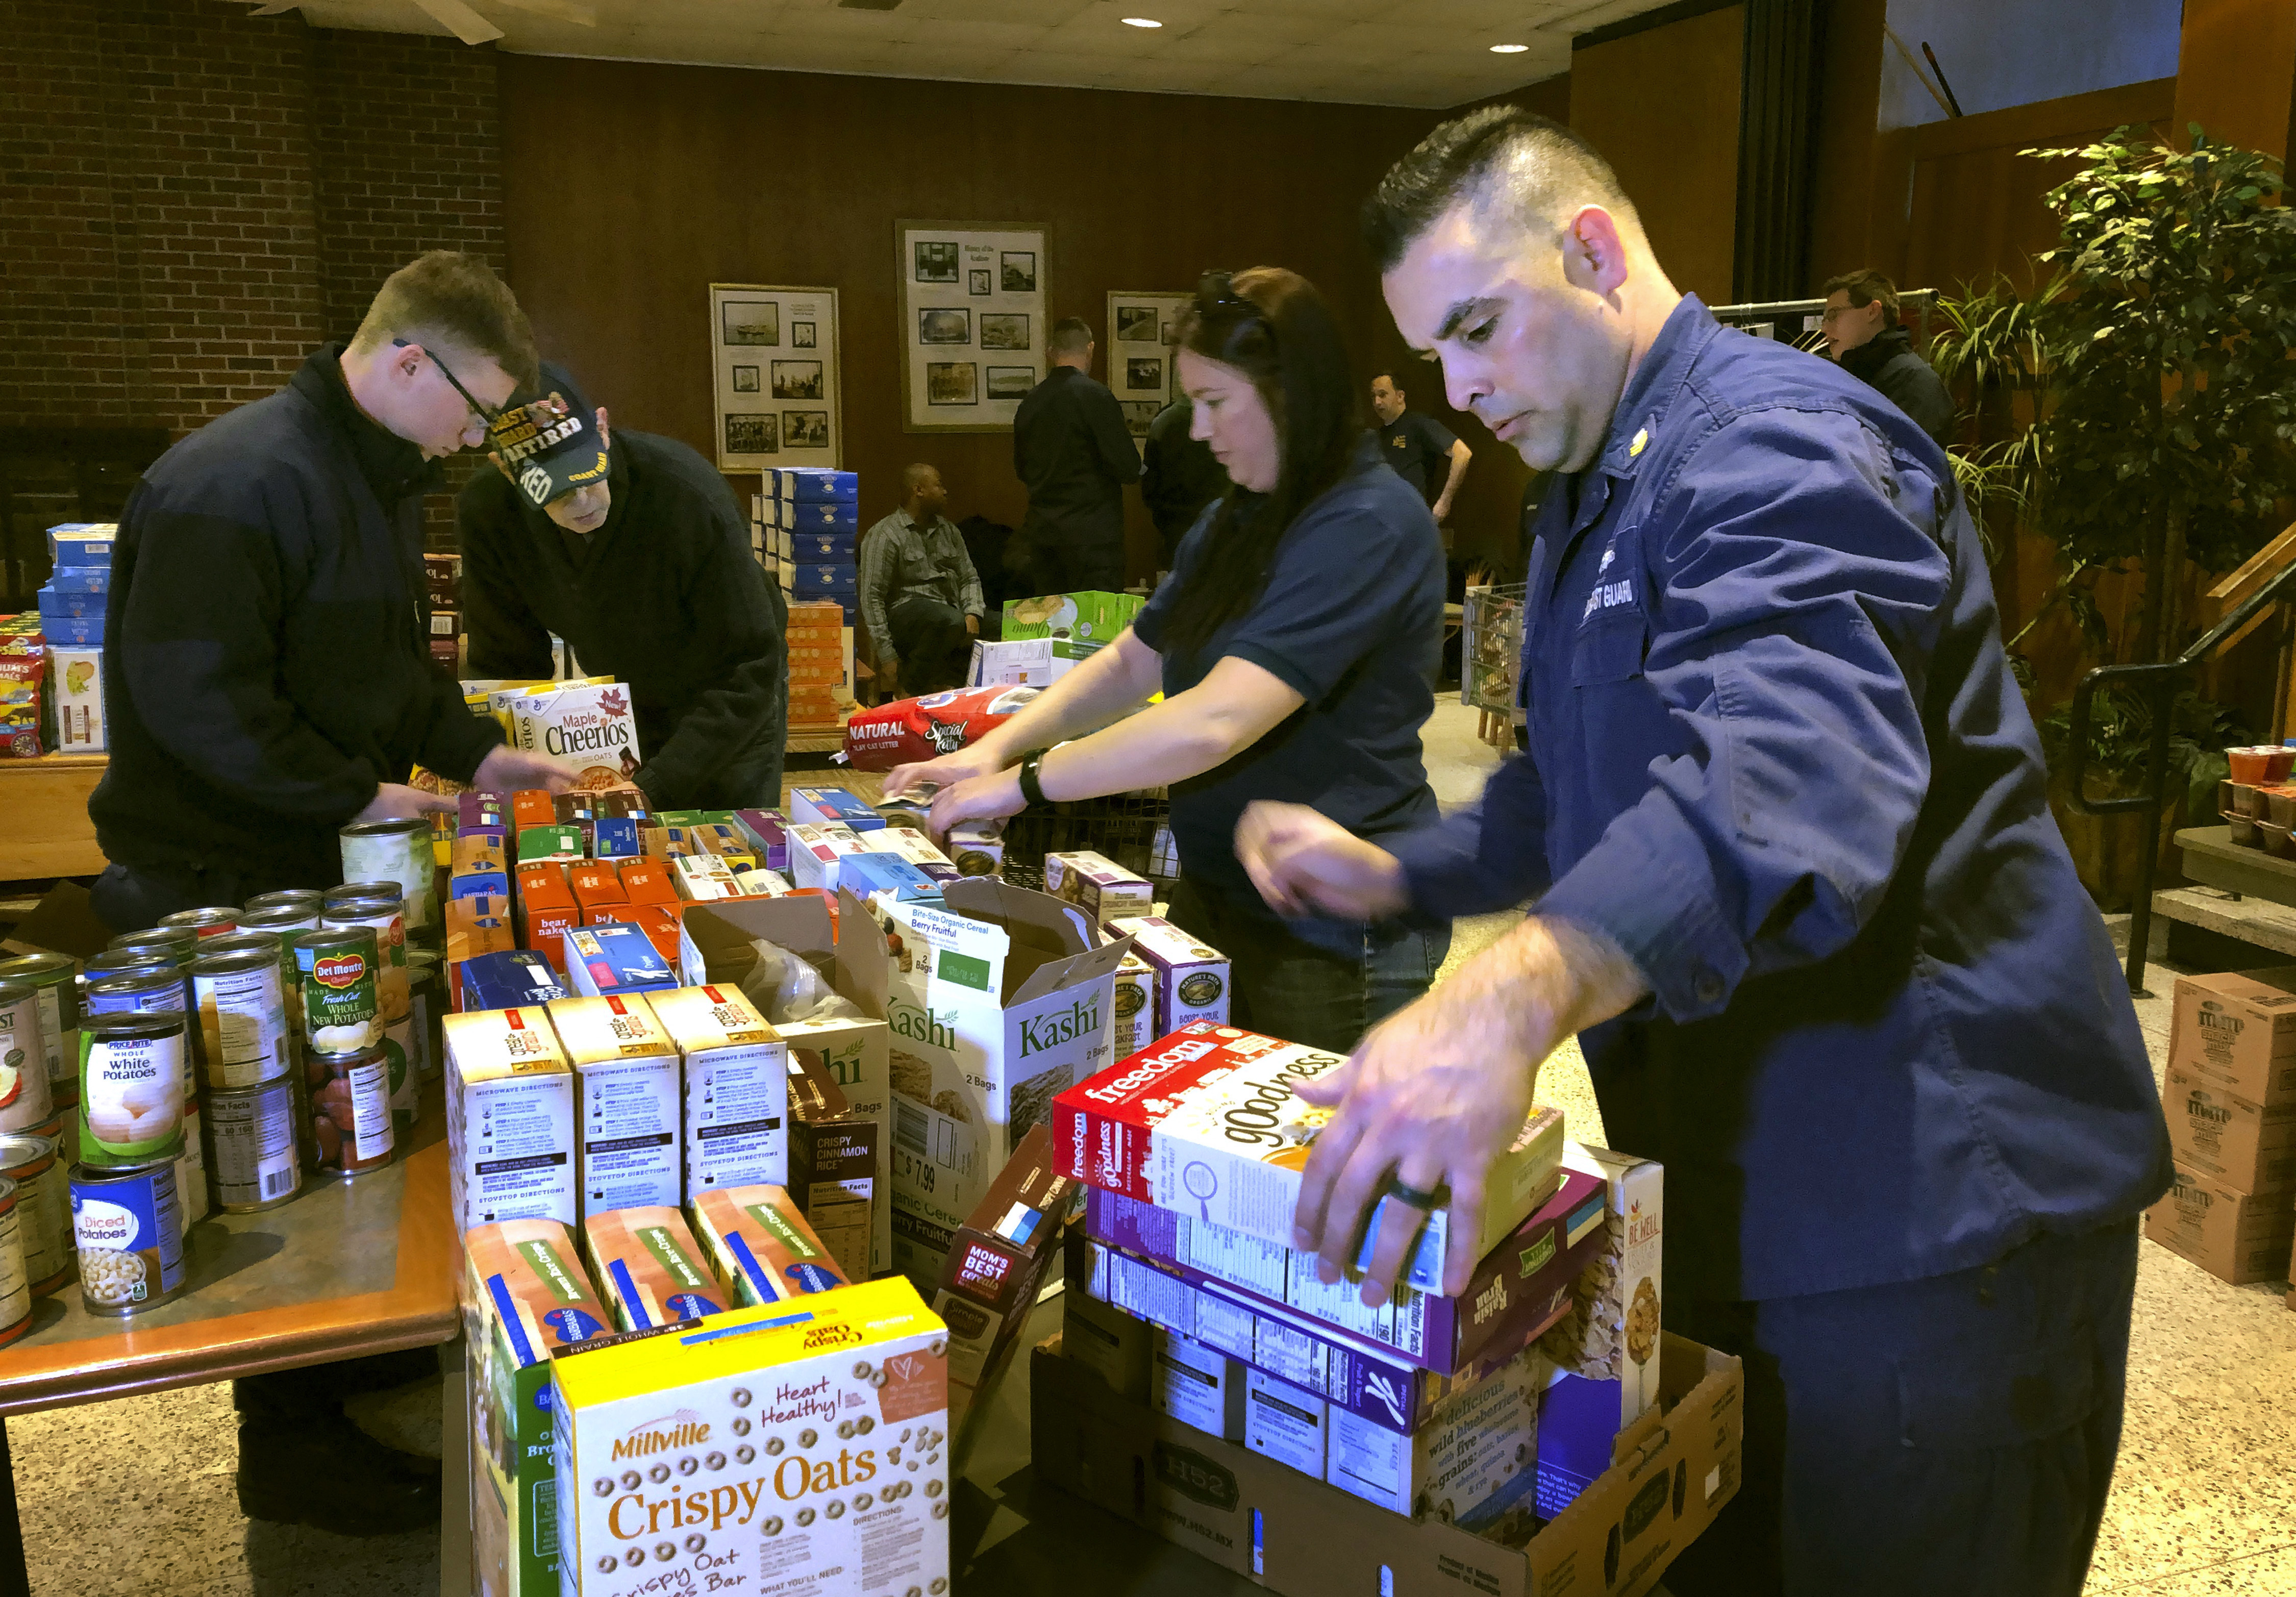 U.S. Coast Guard Culinary Specialist Jerry Wright, right, and Petty Officer 2nd Class Lauren Laughlin, second from right, stack boxes of donated cereal at a pop-up food pantry created at the Coast Guard Academy in New London, Conn., on Jan. 17, 2019. (Susan Haigh&mdash;AP)